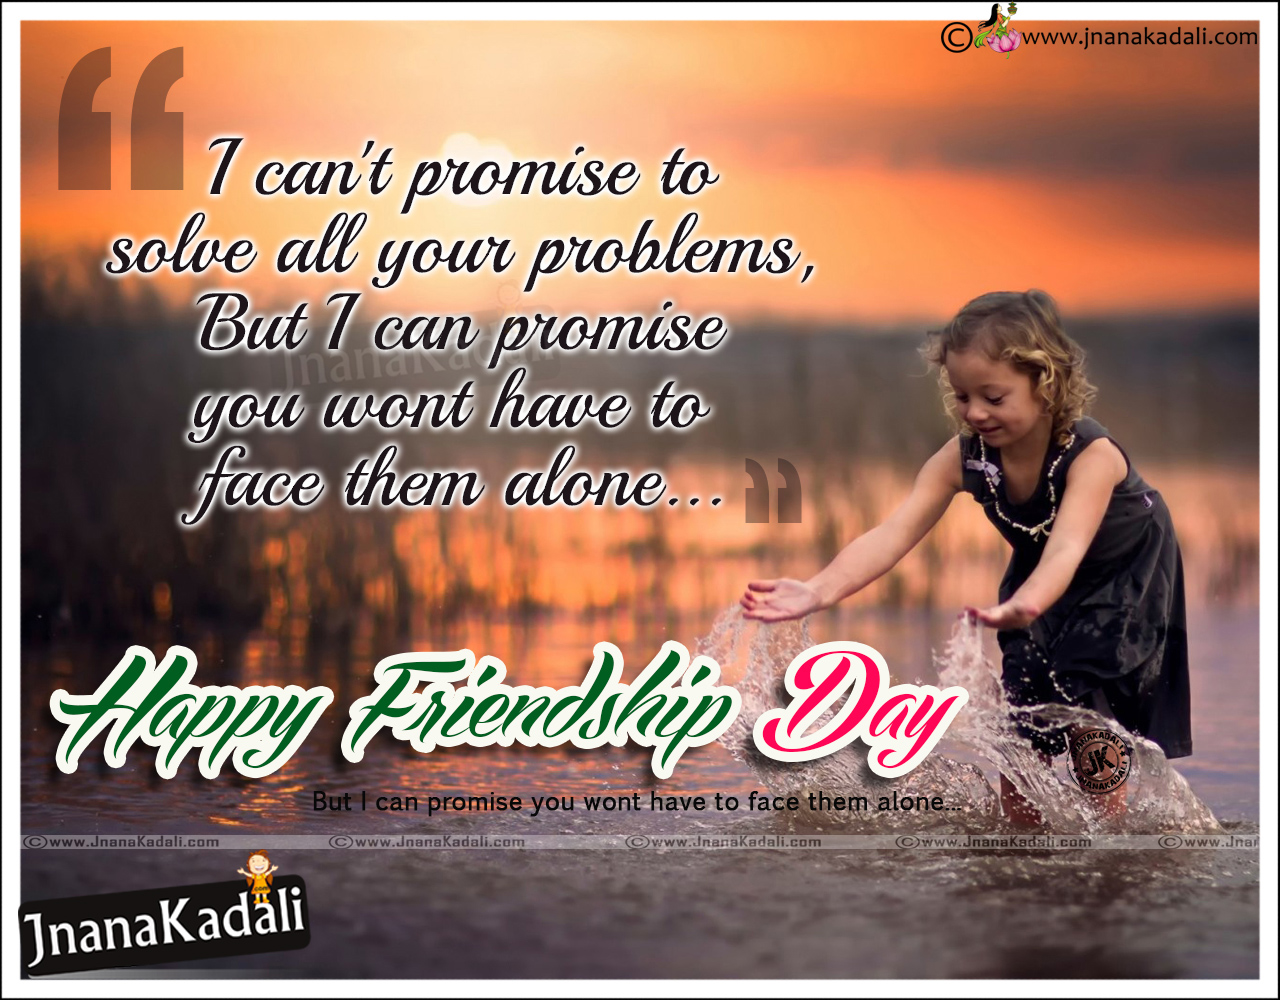 Happy Friendship Day English Latest Messages With Hd Wallpapers International Friendship Day Messages Greetings Jnana Kadali Com Telugu Quotes English Quotes Hindi Quotes Tamil Quotes Dharmasandehalu